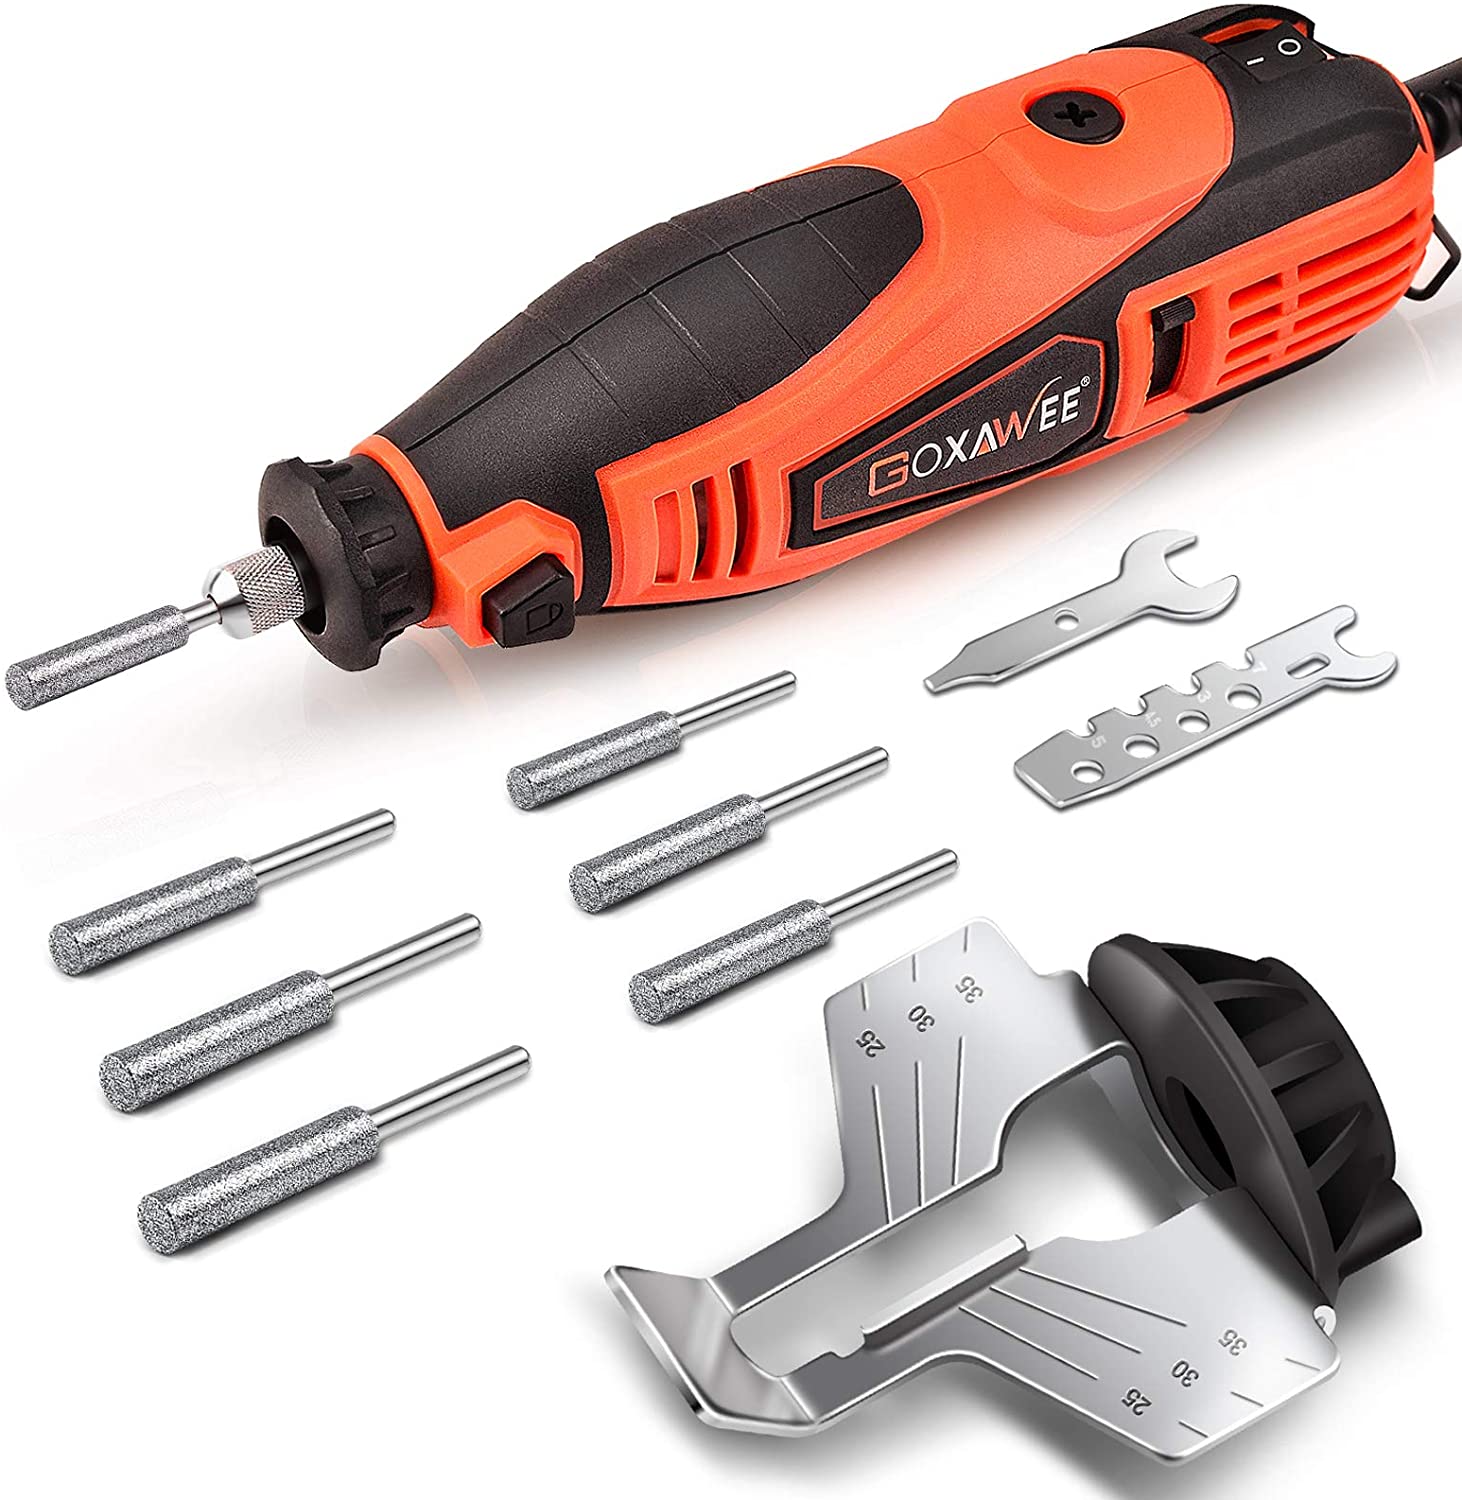 GOXAWEE Chainsaw Sharpener Kit 180W Power Chain Saw Sharpen Tool Set, Electric Blade Sharpening File Comes with 6pcs Diamond Sharpening Wheels, Angle Attachment (5 Speed Setting, 8000~35000 RPM)